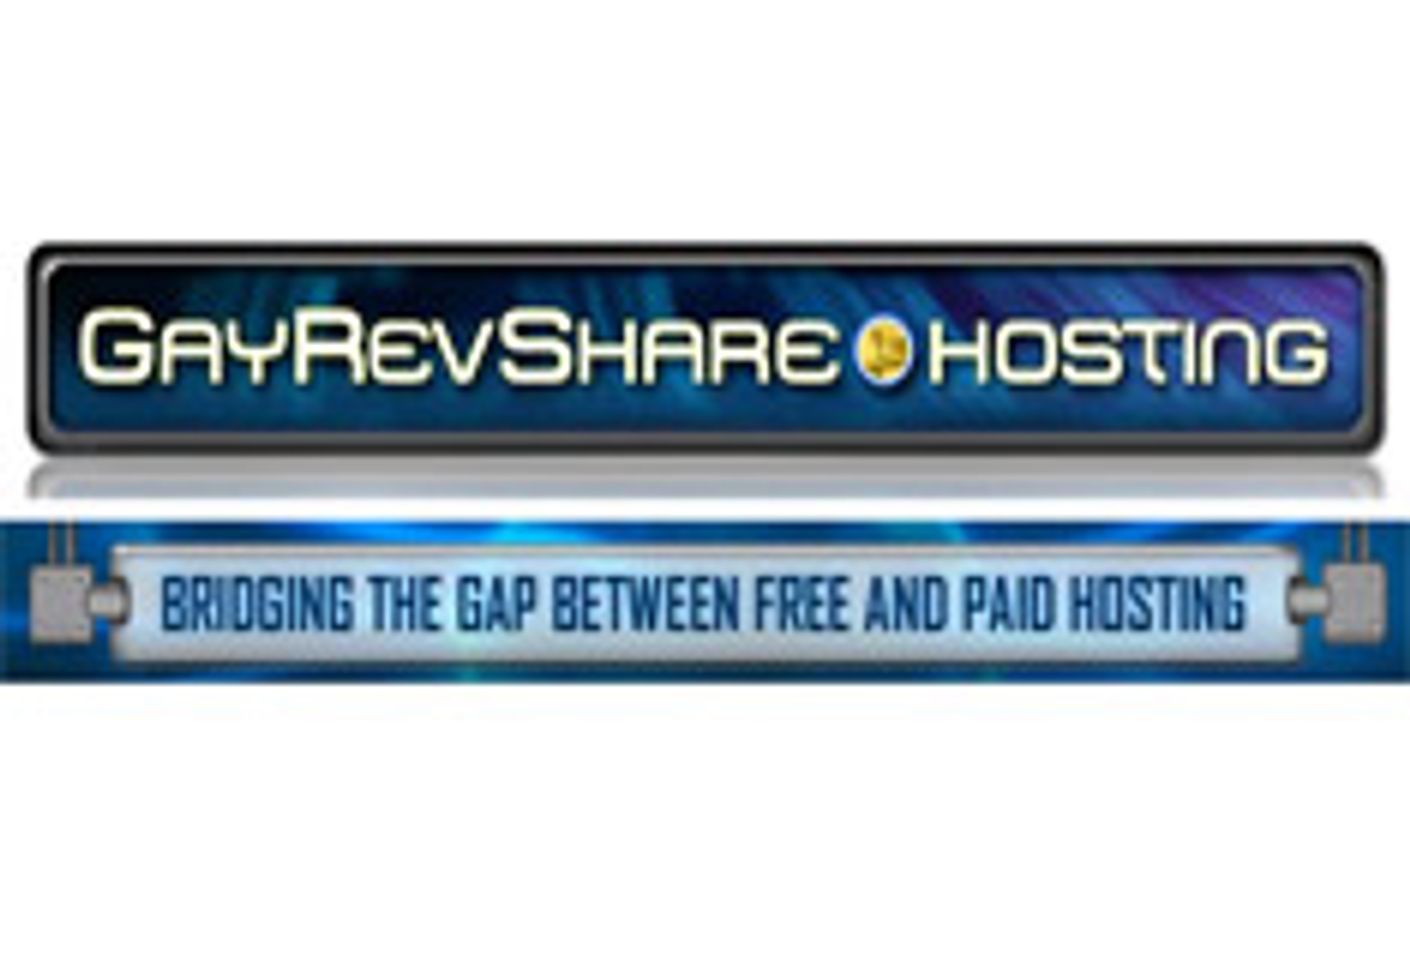 RevShareHosting Announces Launch of Host-Free Gay Division